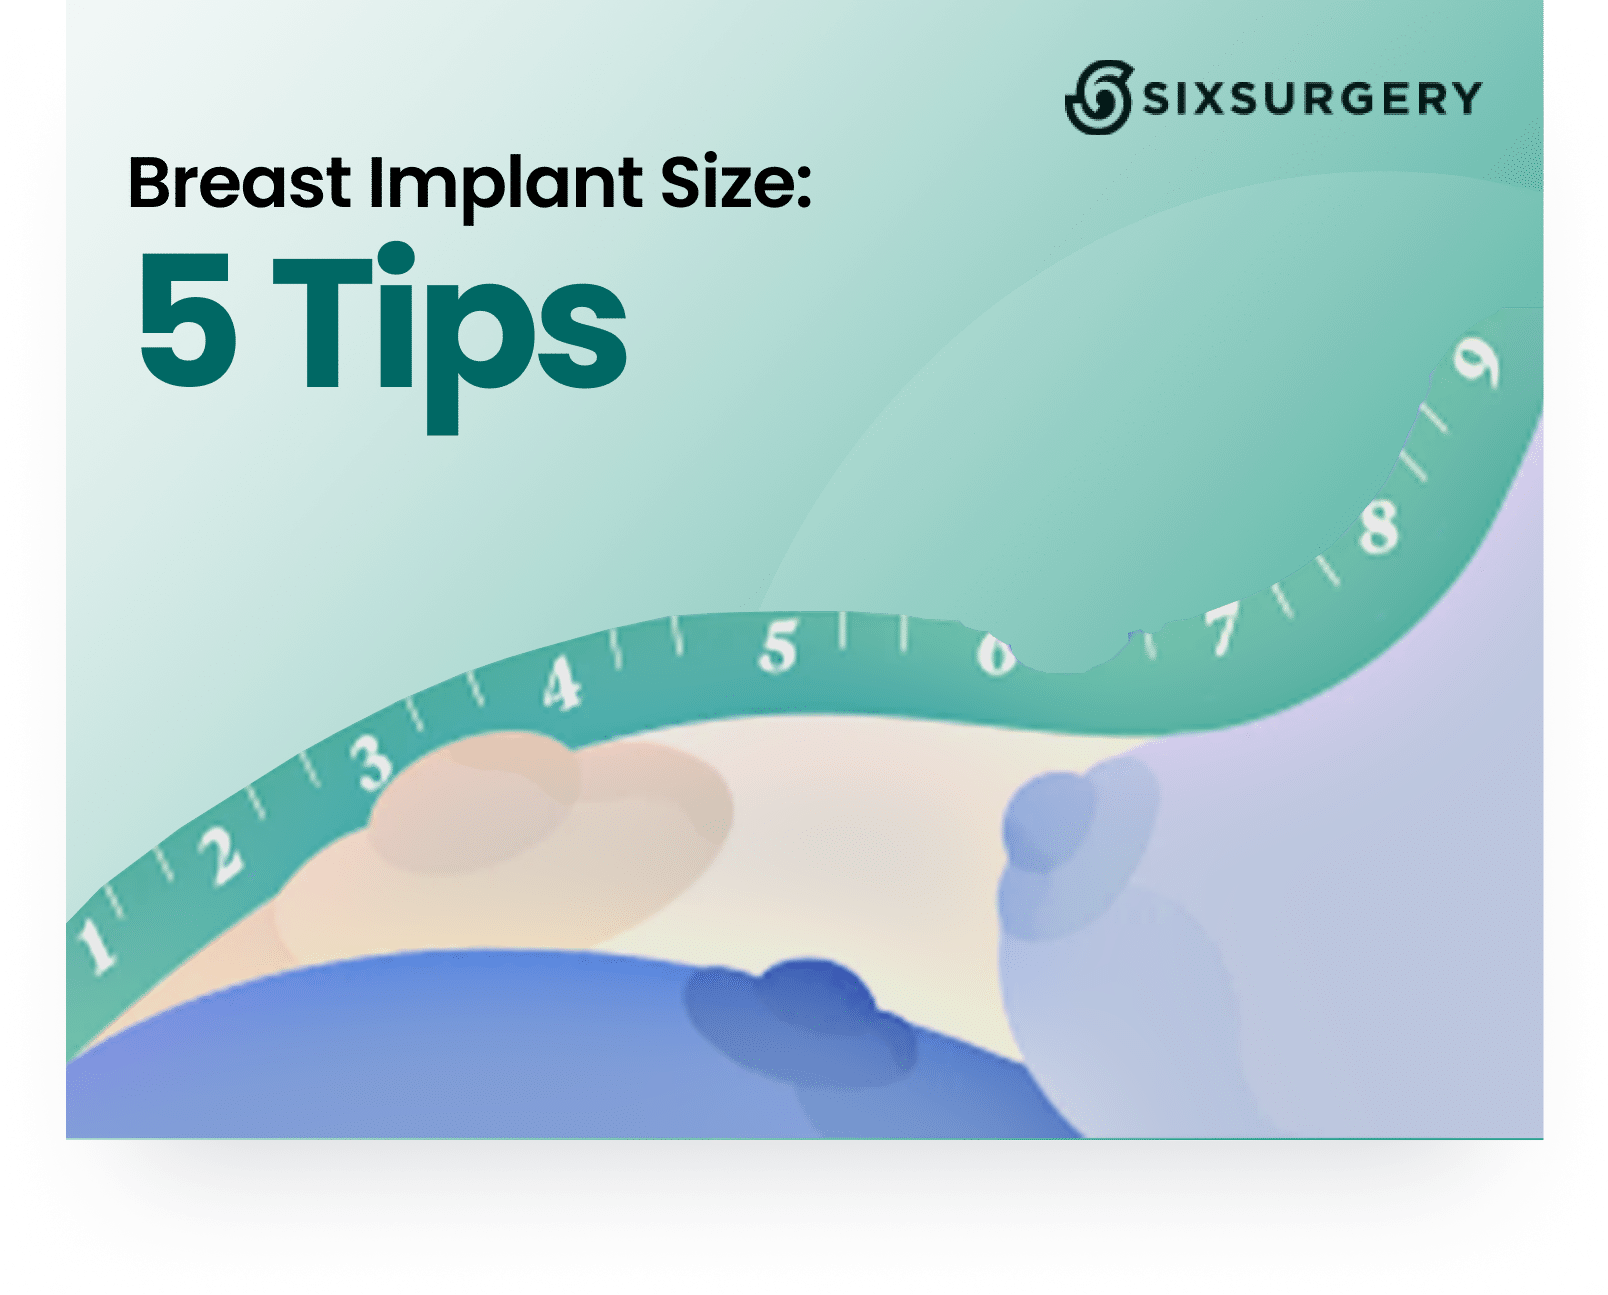 How to choose breast implant size